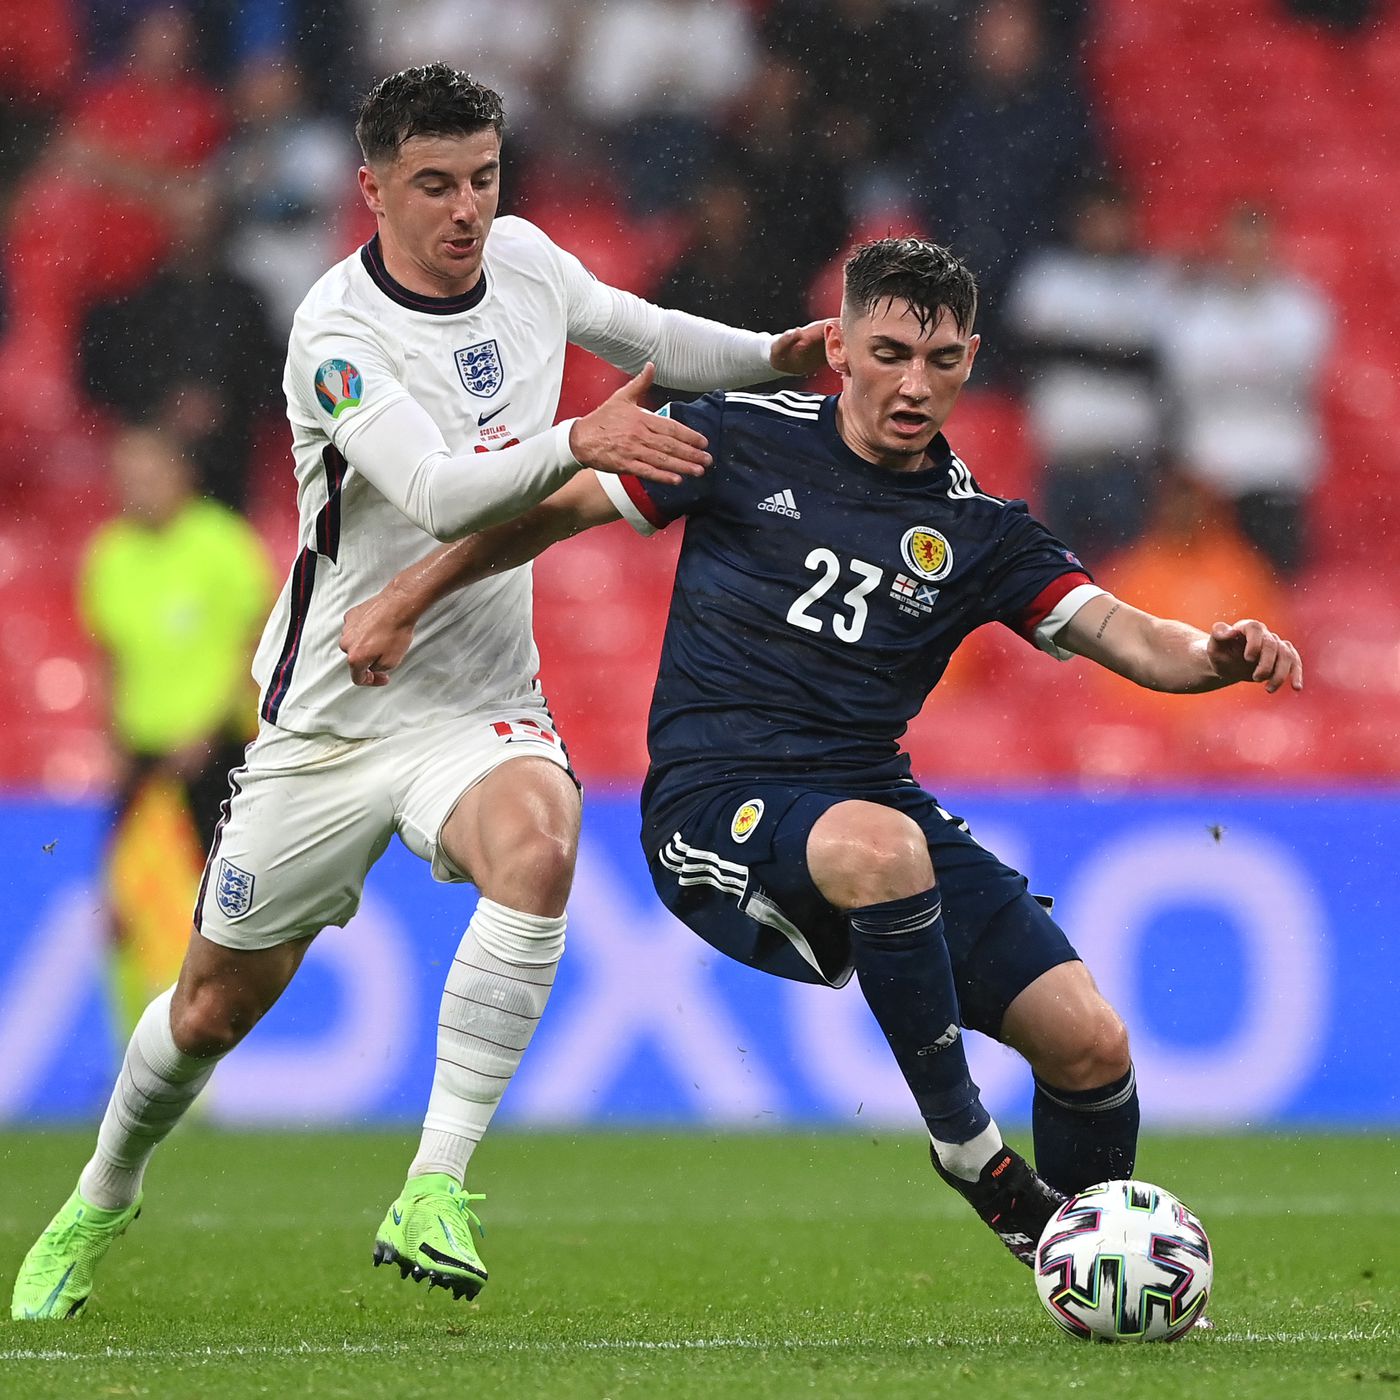 OFFICIAL: Scotland has confirmed Billy Gilmour has tested positive for COVID-19